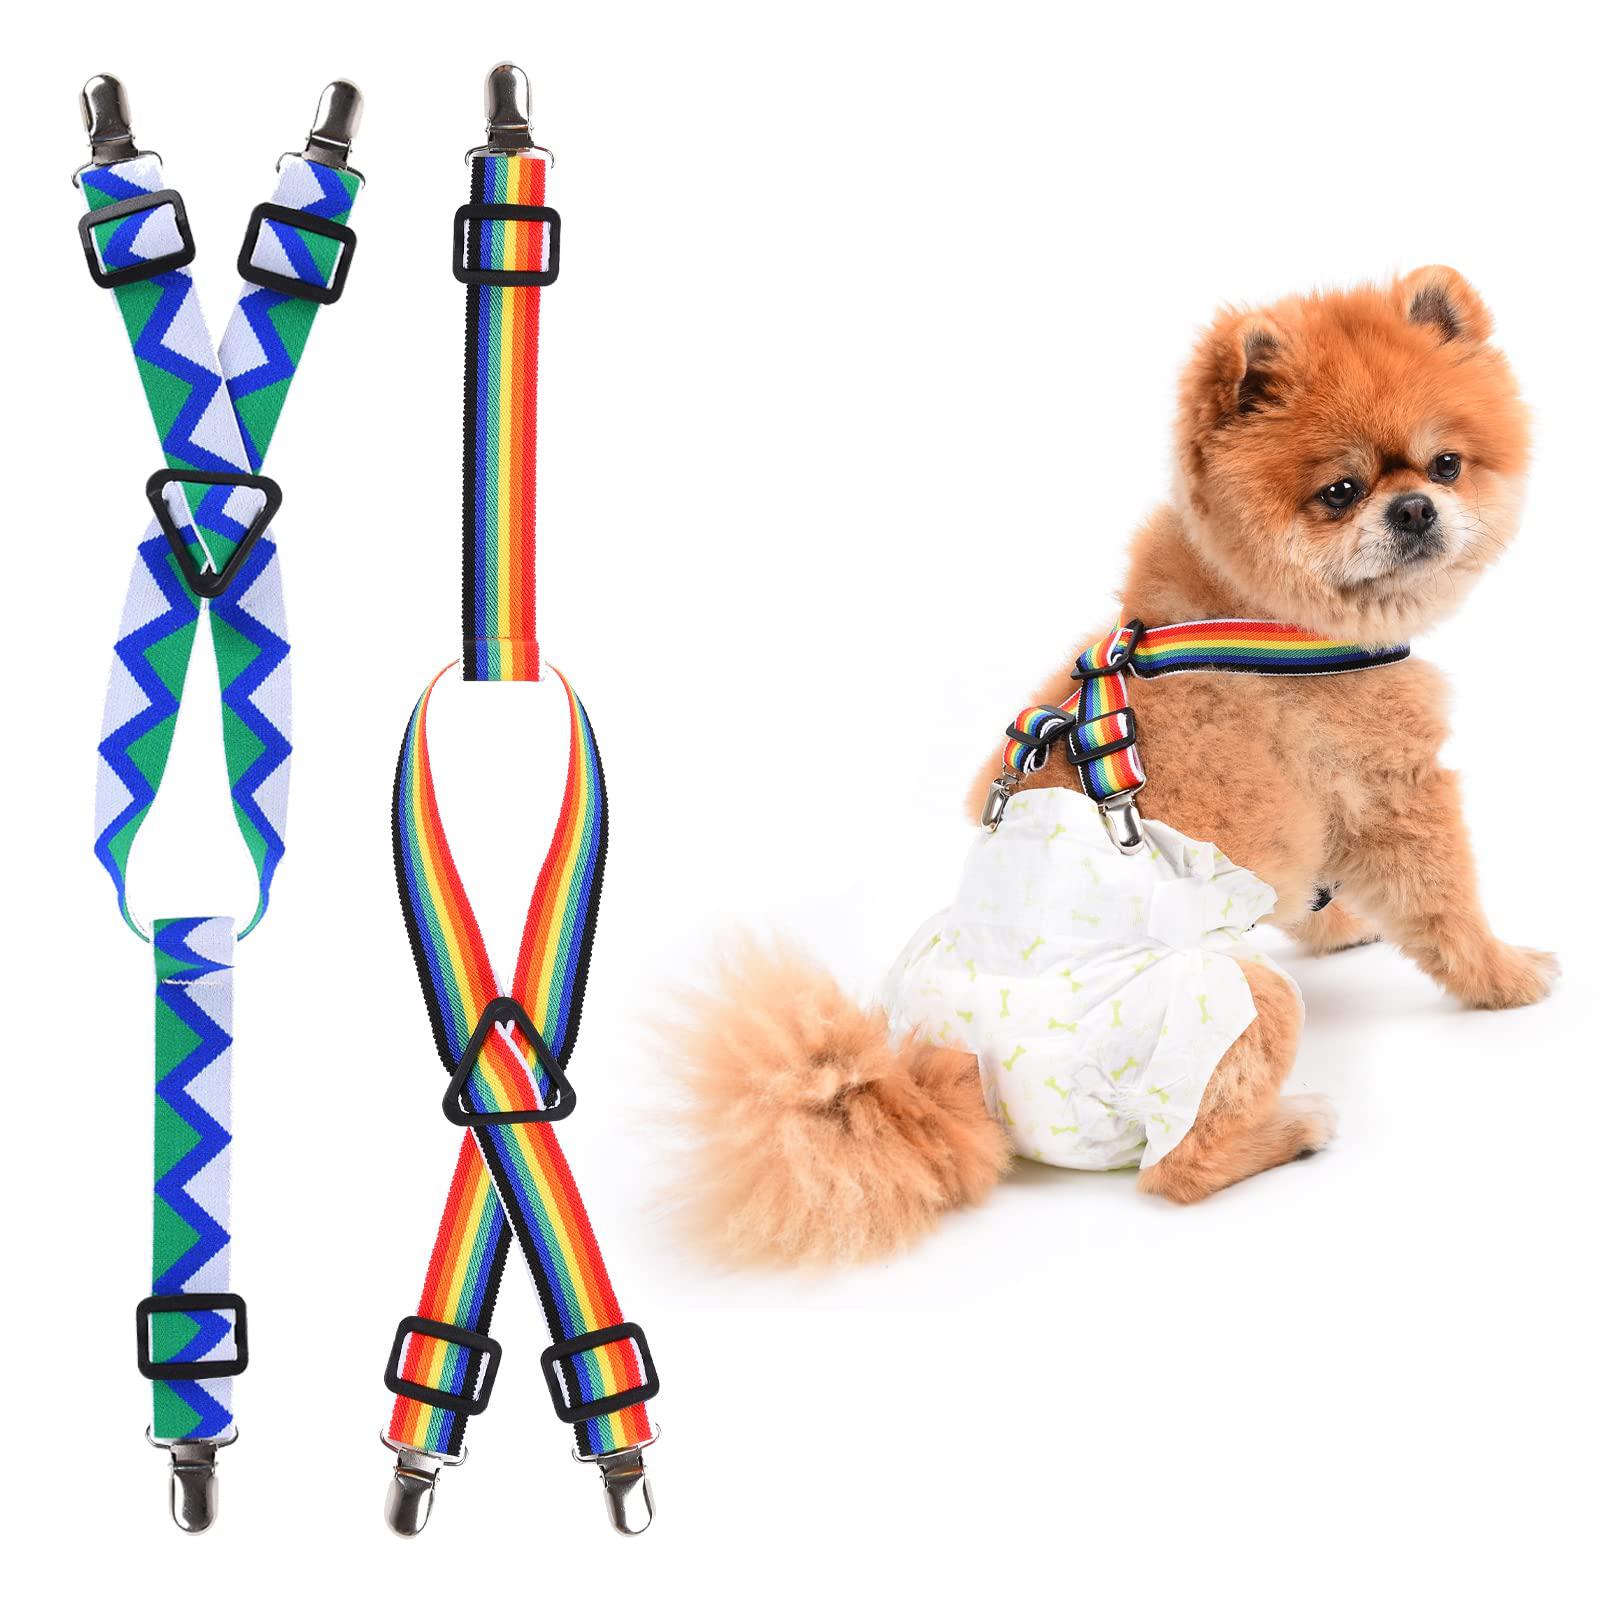 tessveya 2 pieces dog diaper suspenders | adjustable elasticity dog suspenders | belly bands canine harness | female male puppy dress 